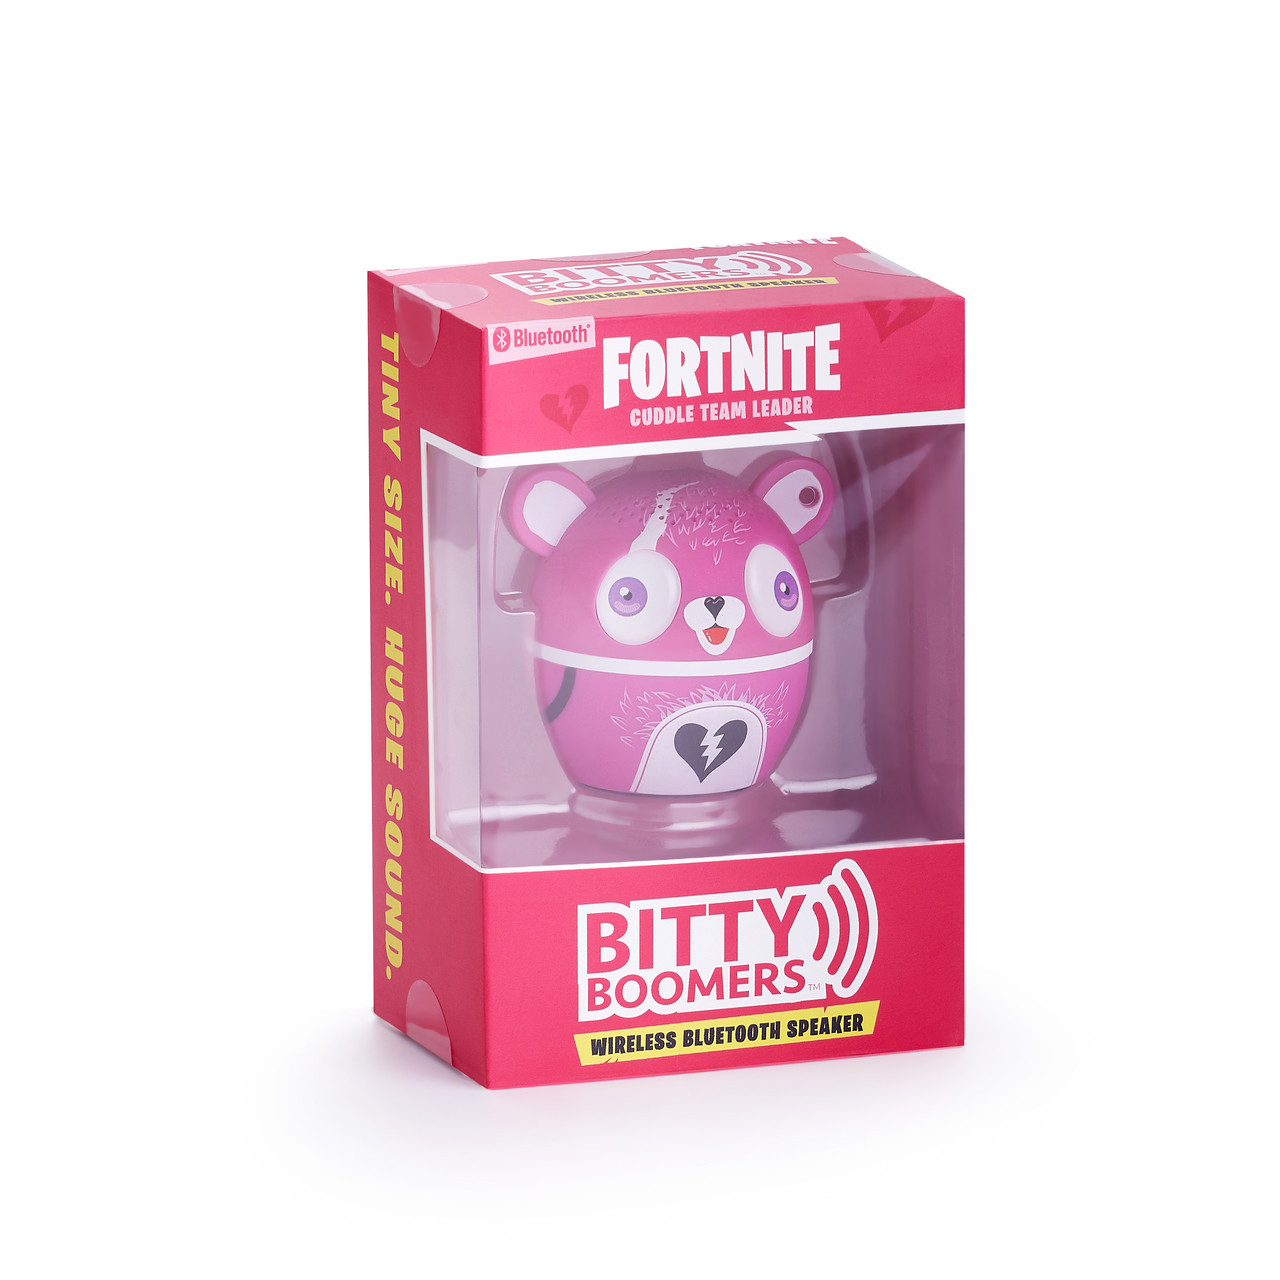 Fortnite Cuddle Team Leader Bitty Boomer-Portable Wireless Bluetooth Speaker-Awesome Sound